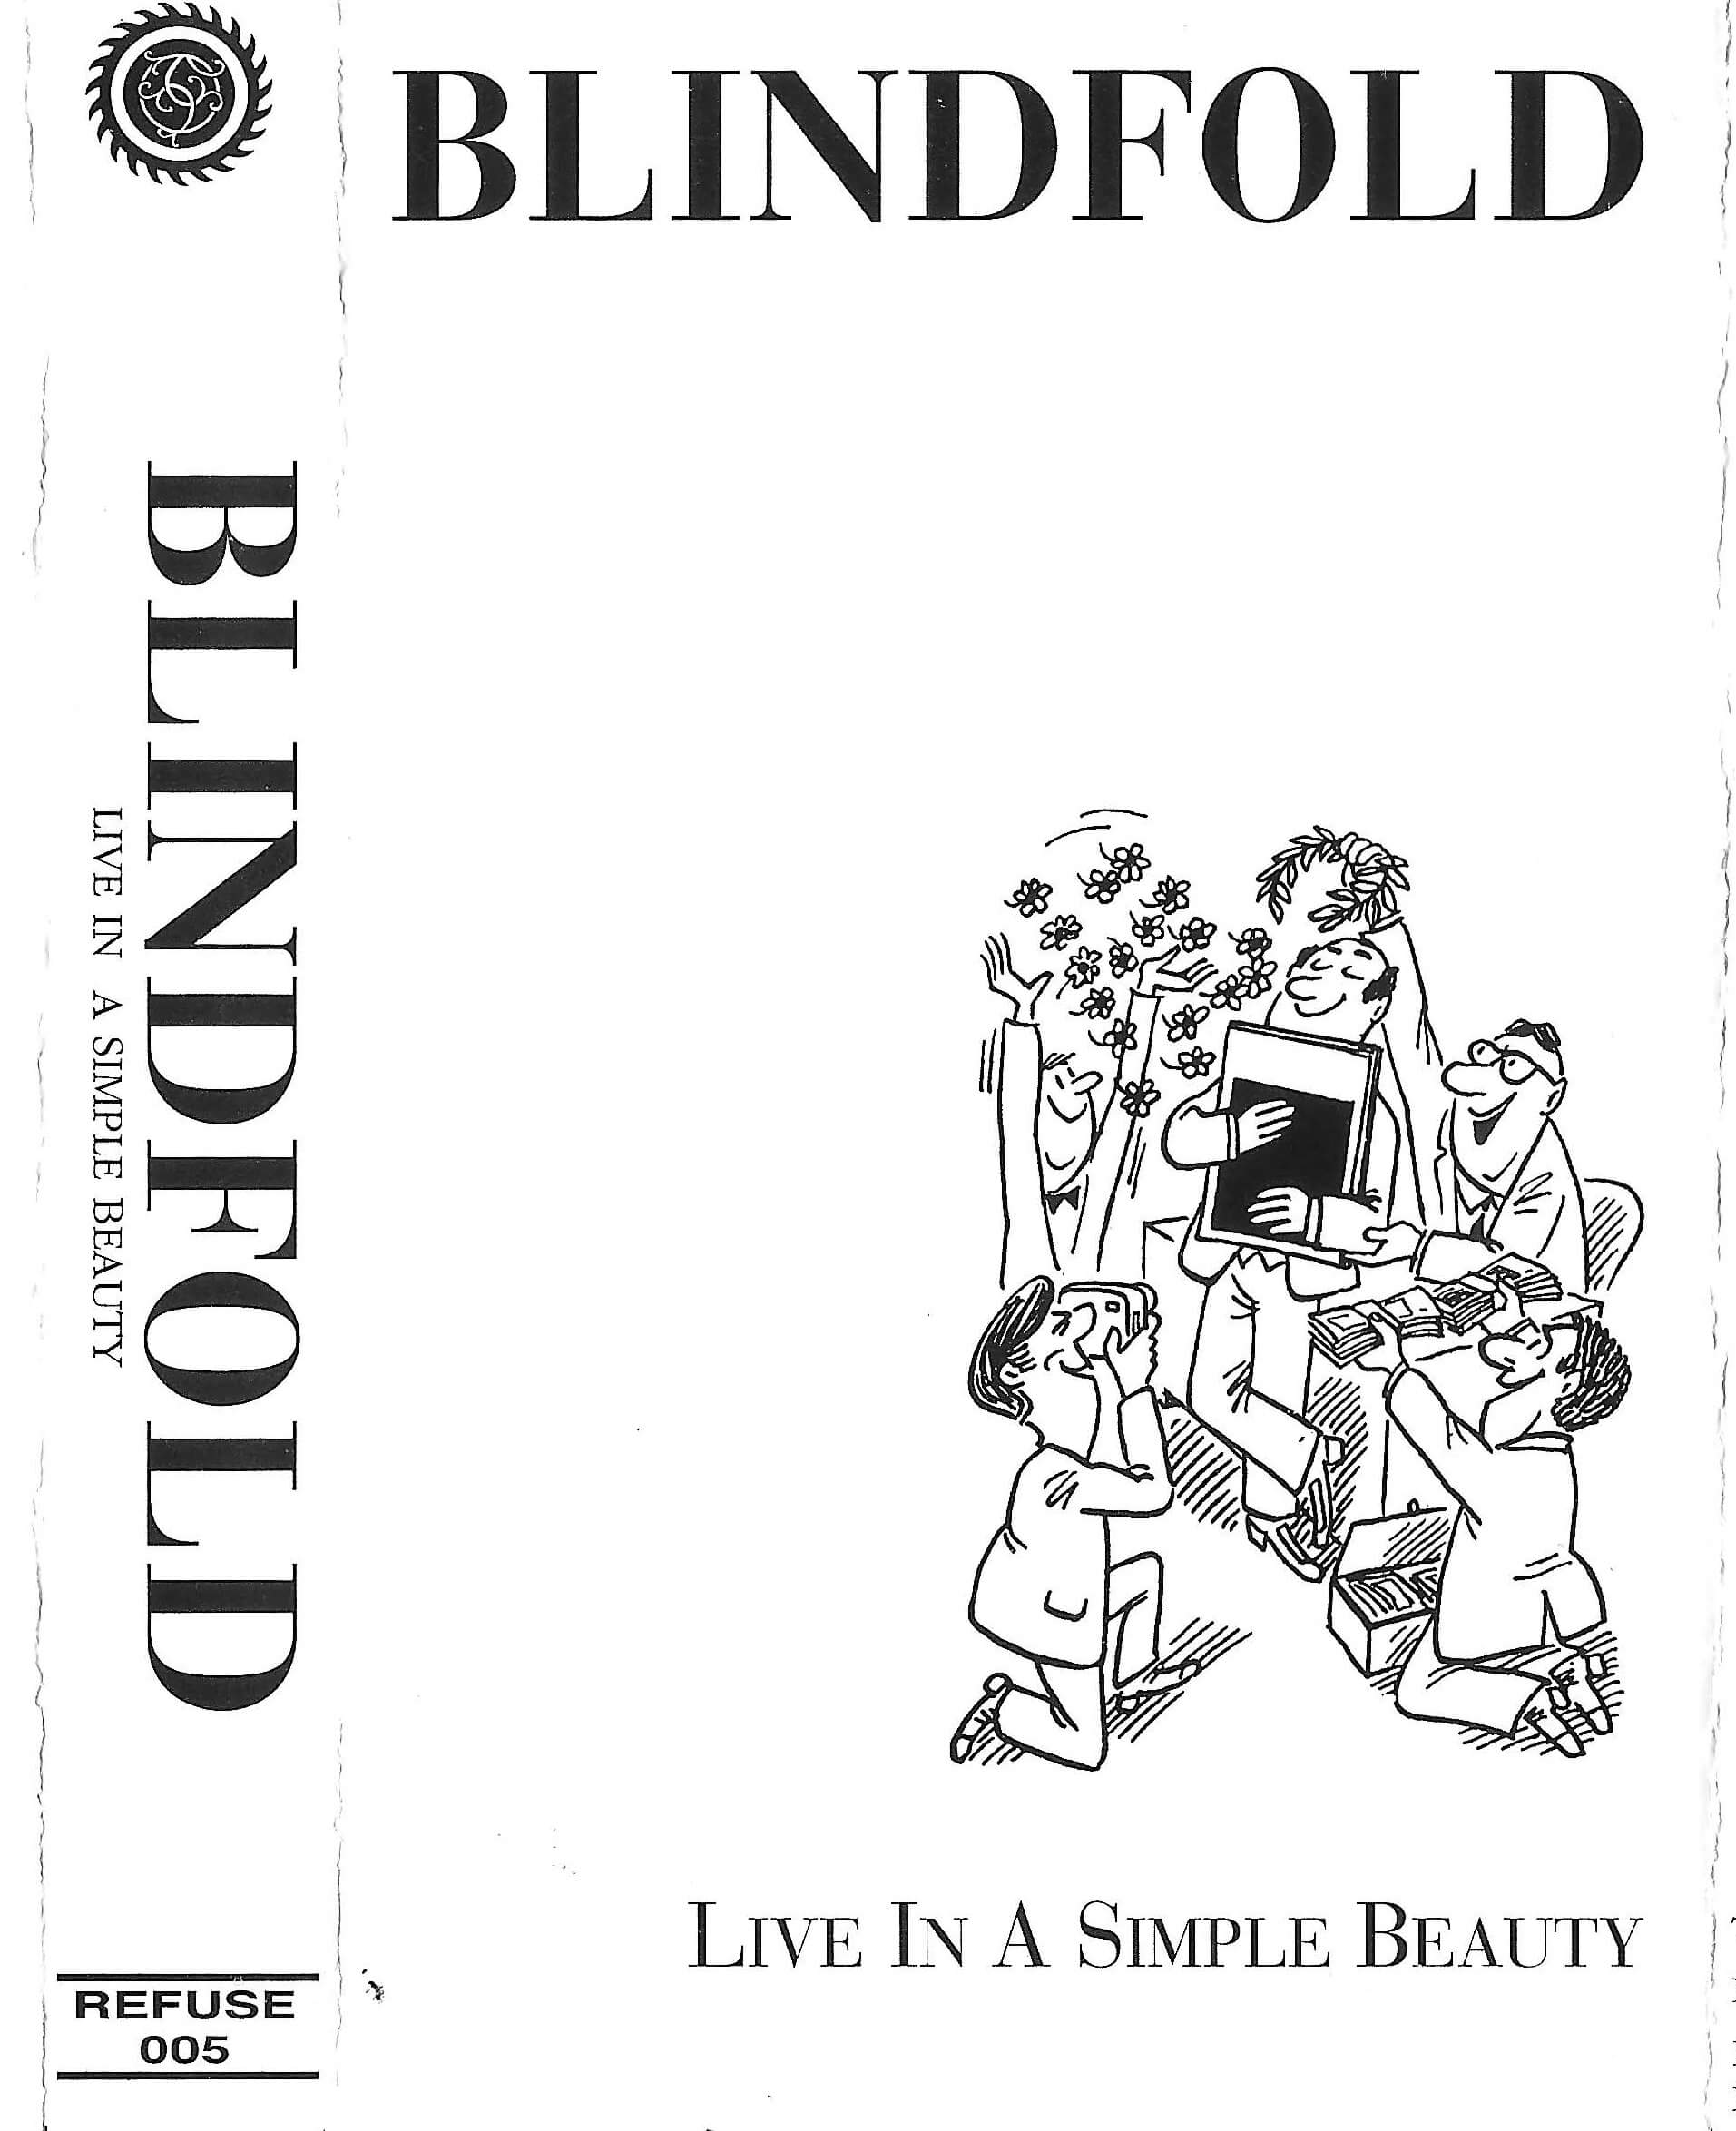 Early Blindfold Live Recordings tapes